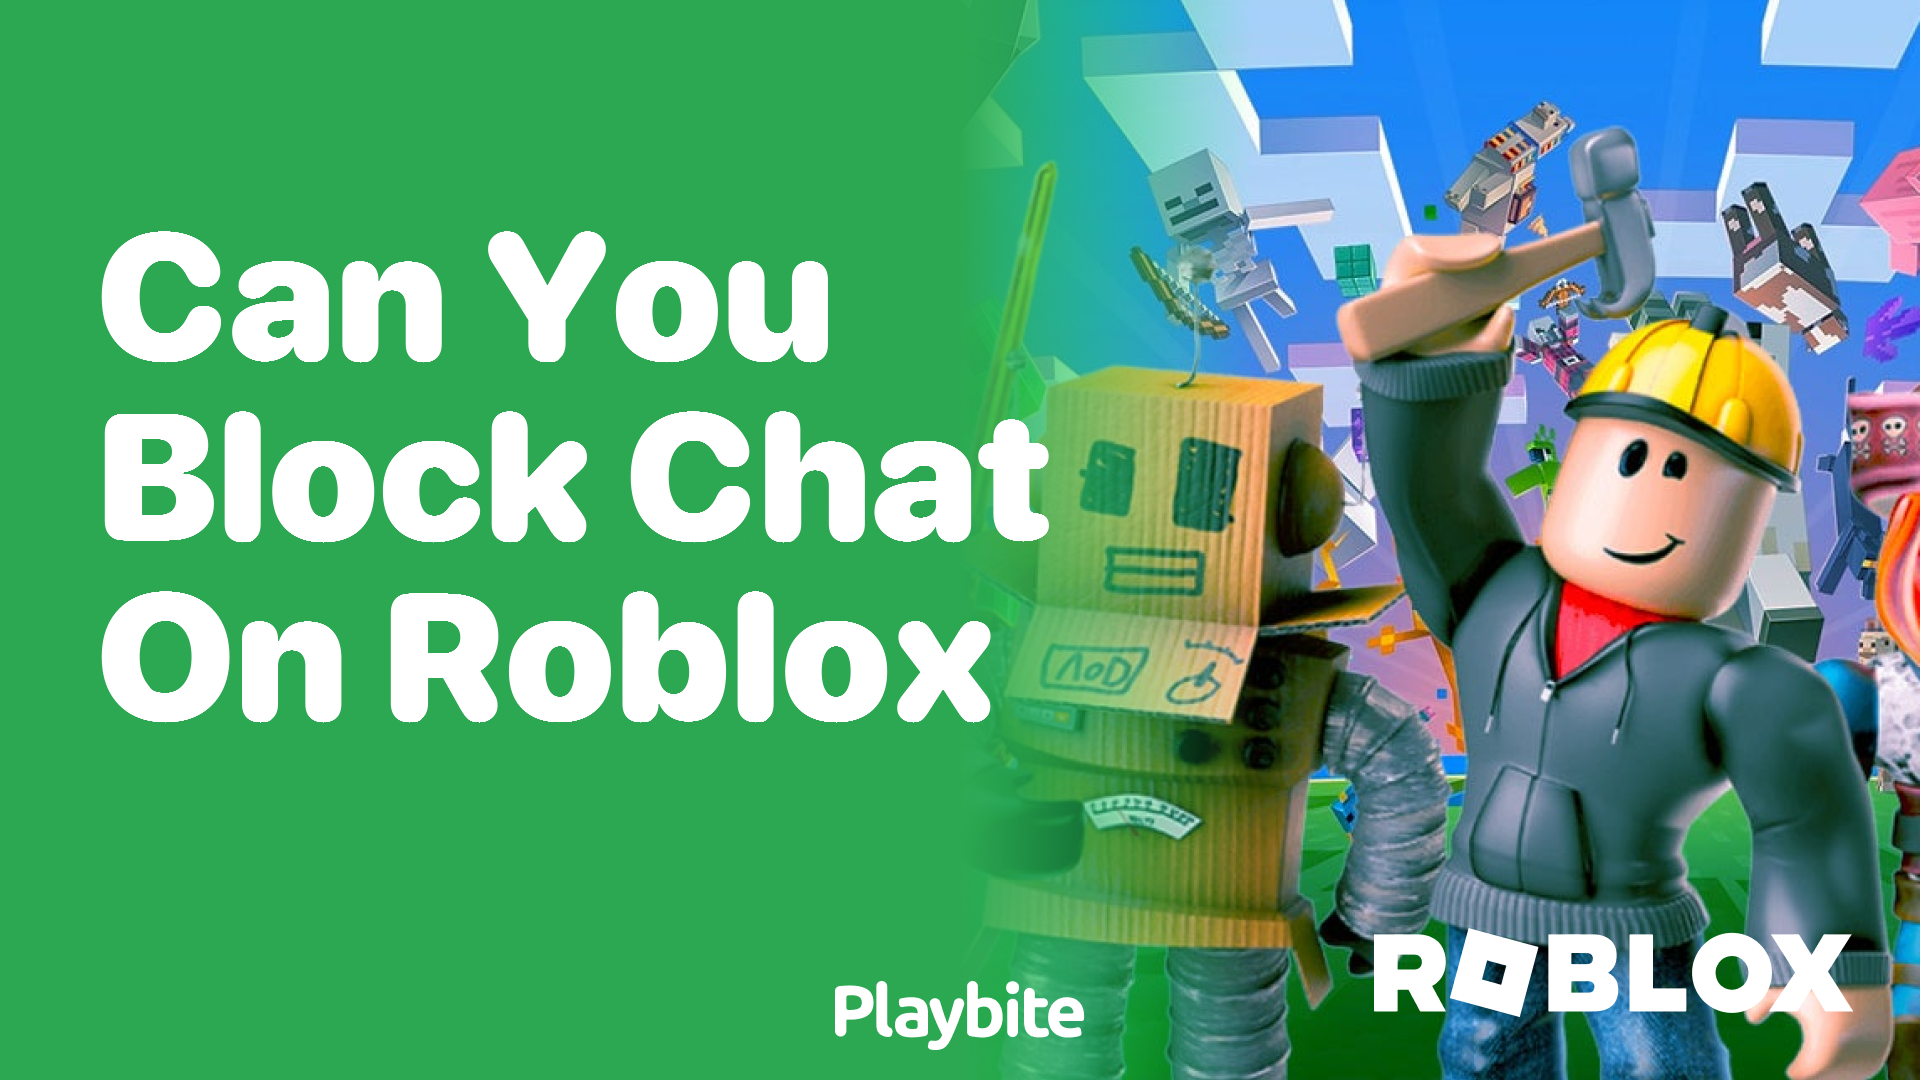 Can You Block Chat on Roblox? Find Out How!